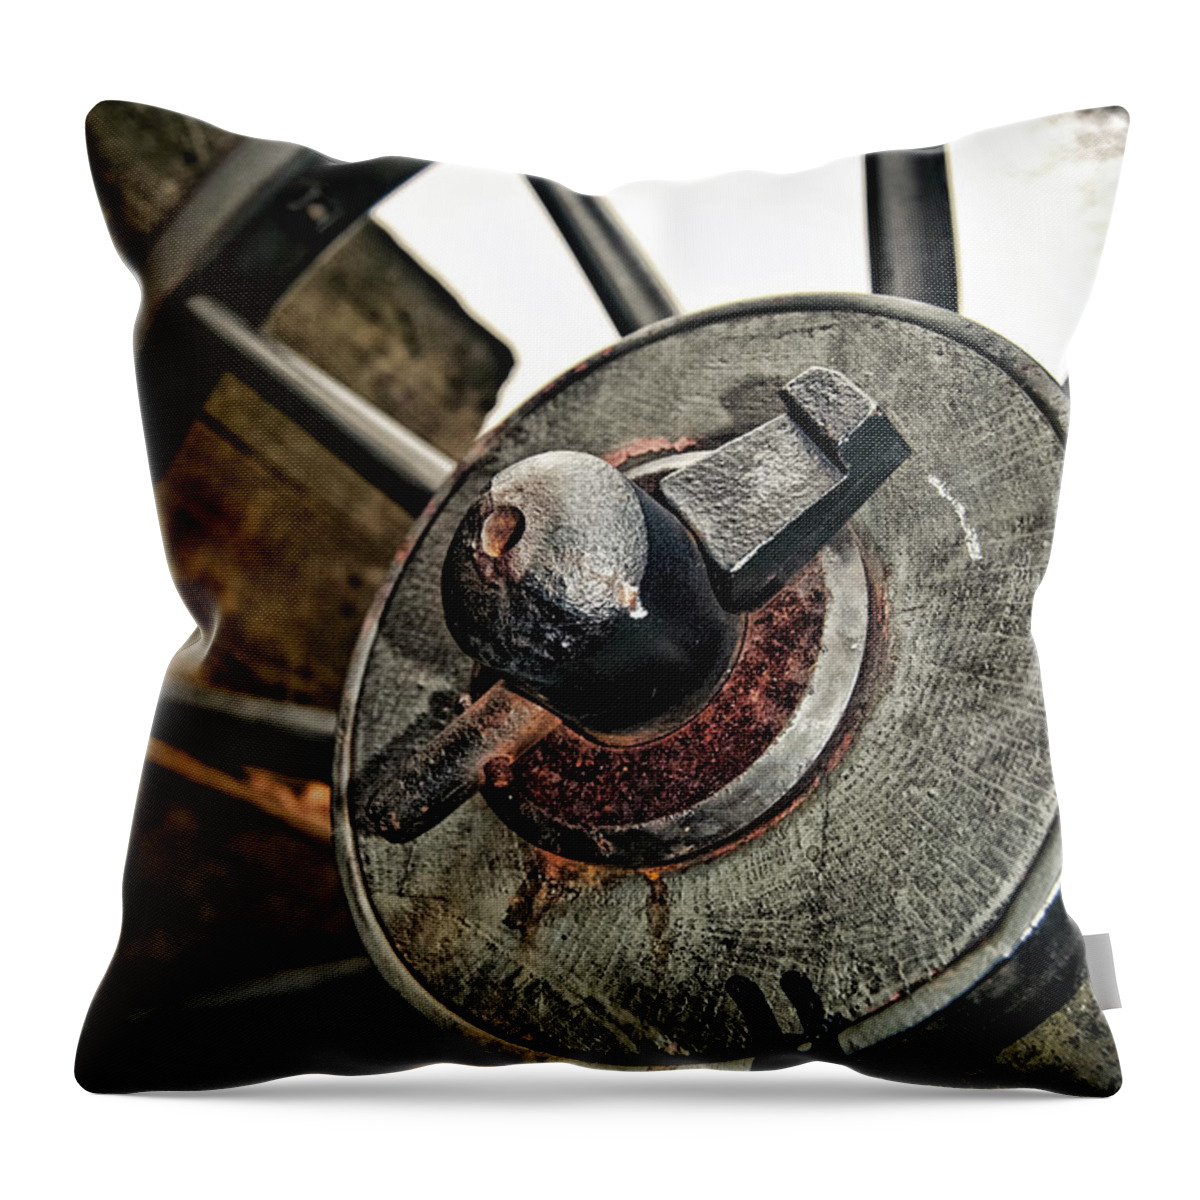 Cannon Throw Pillow featuring the photograph Cannon Wheel by Amber Flowers